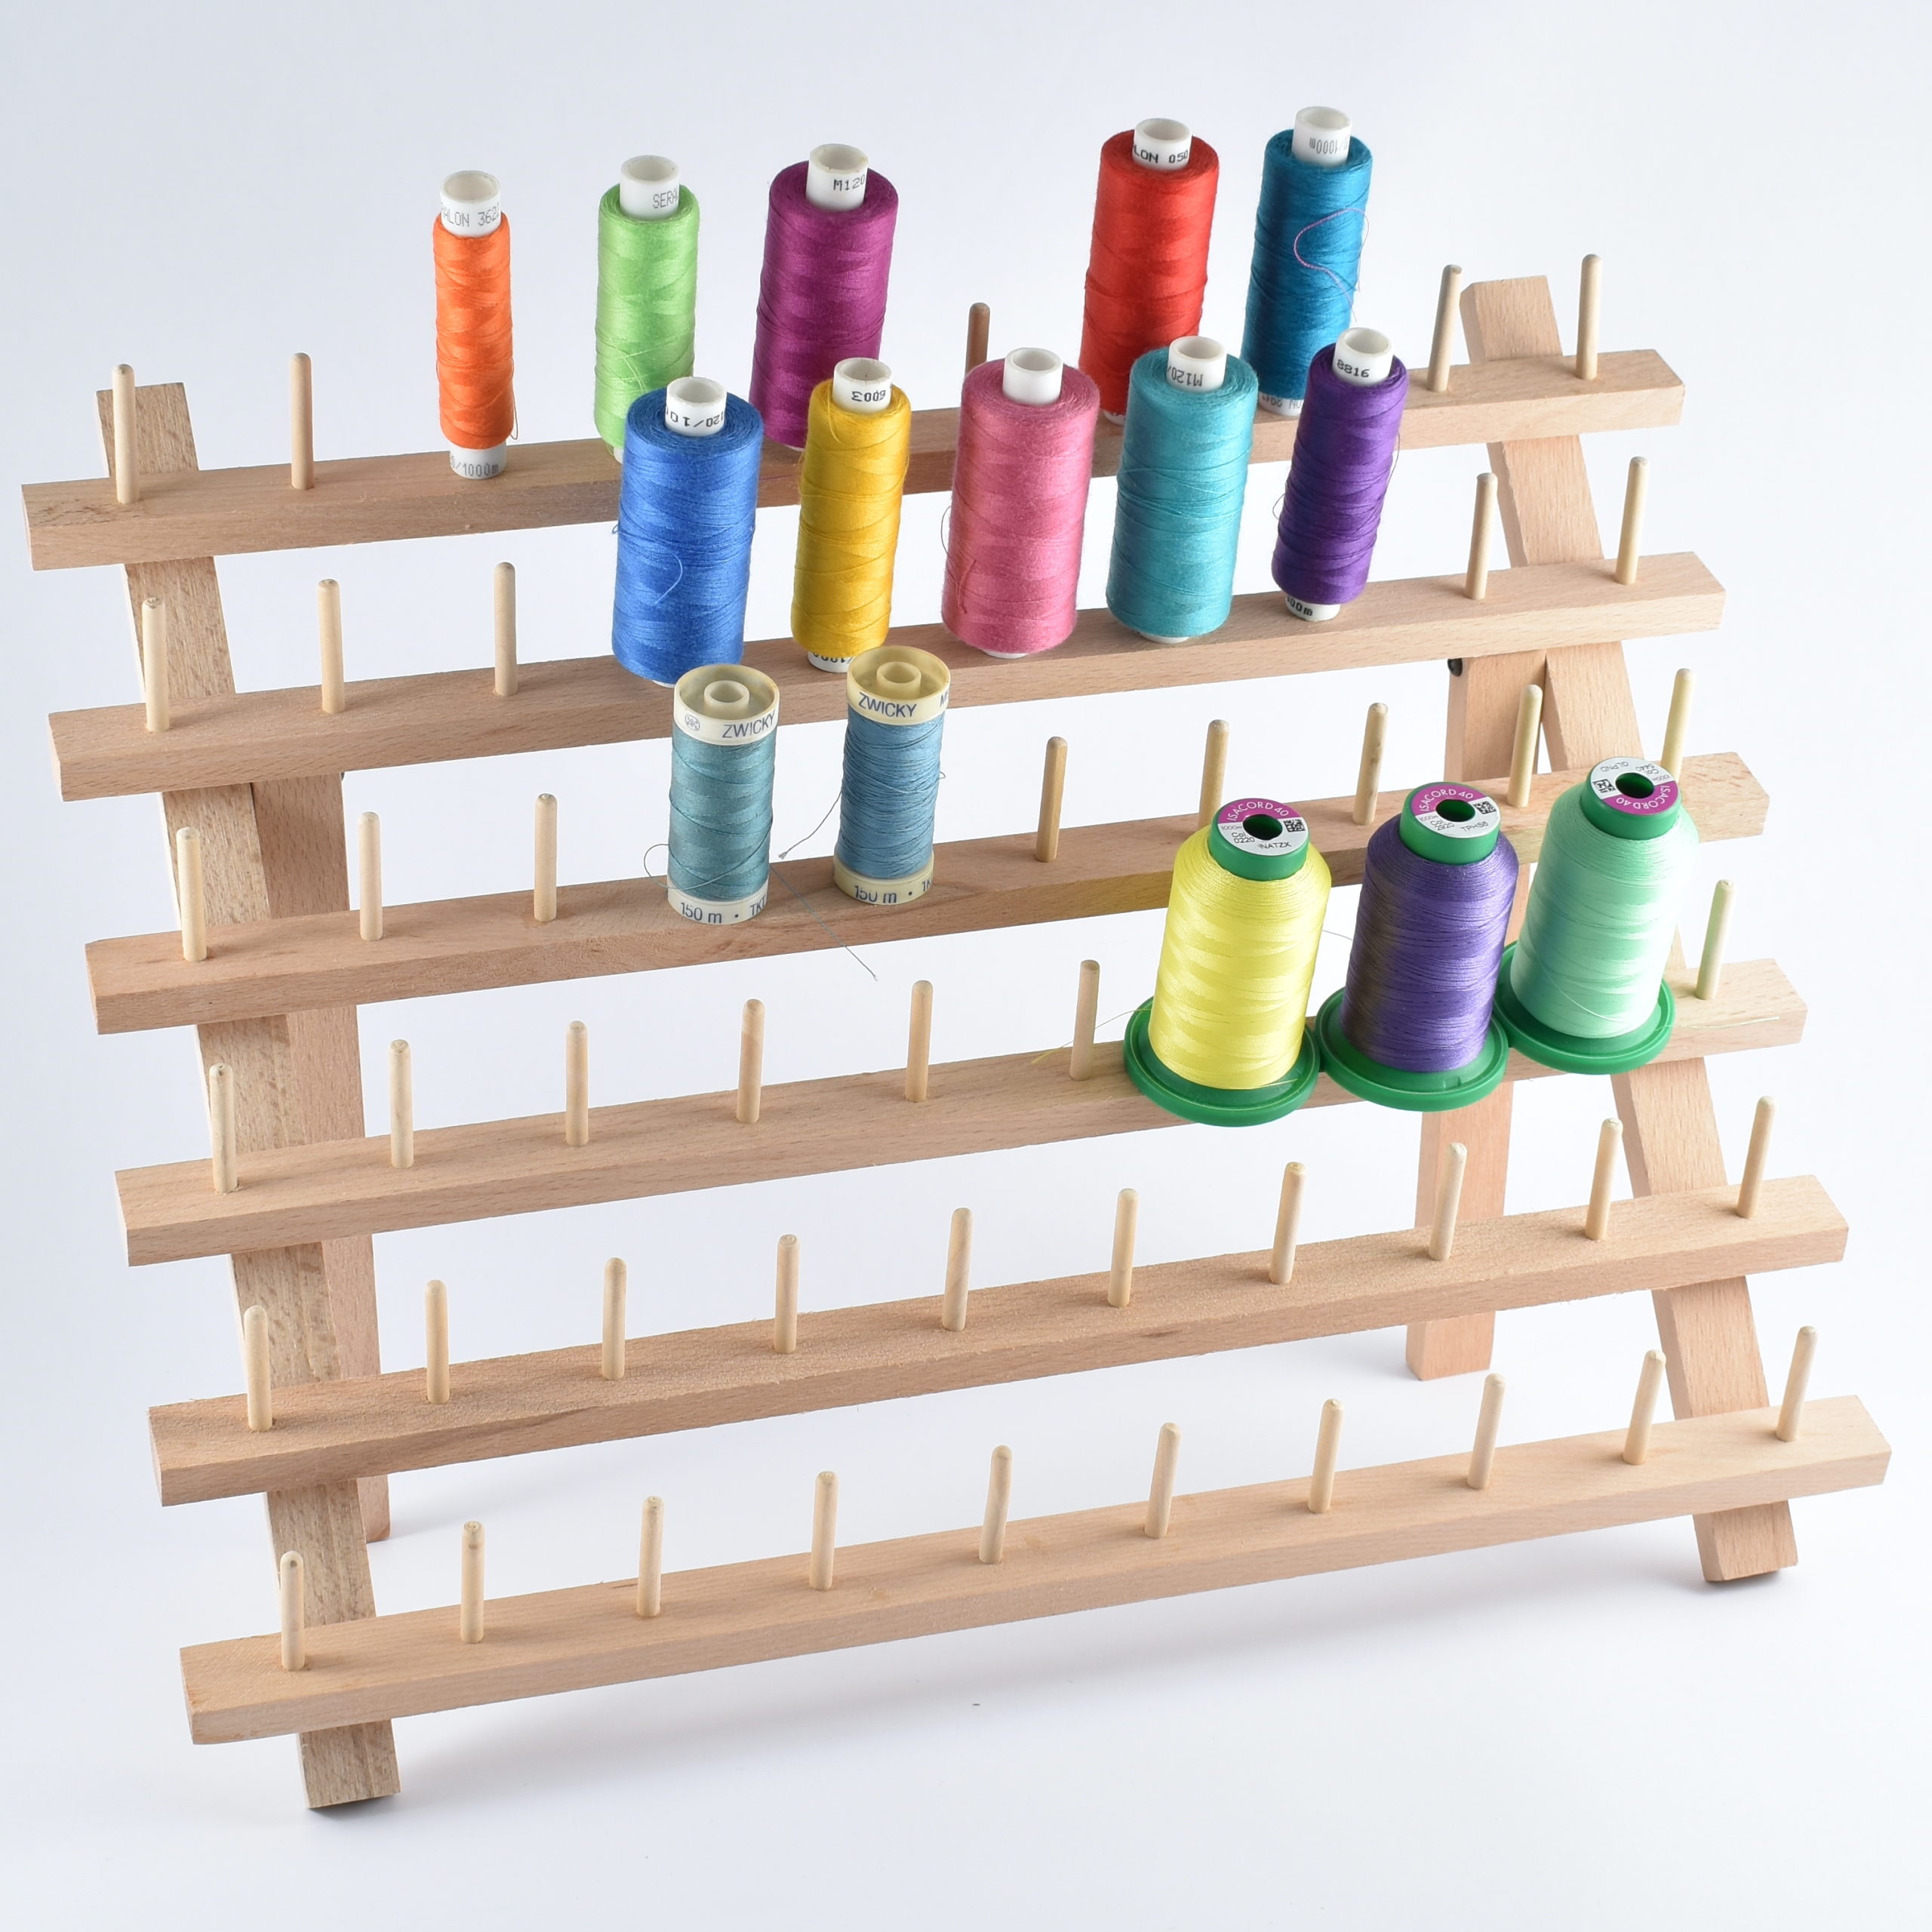 Embroidery Thread Holder, 60 Spools Holder Wooden Thread Rack Braiding Rack  With Needles Sewing Scissors Needle Threader For Embroidery Hair Separated